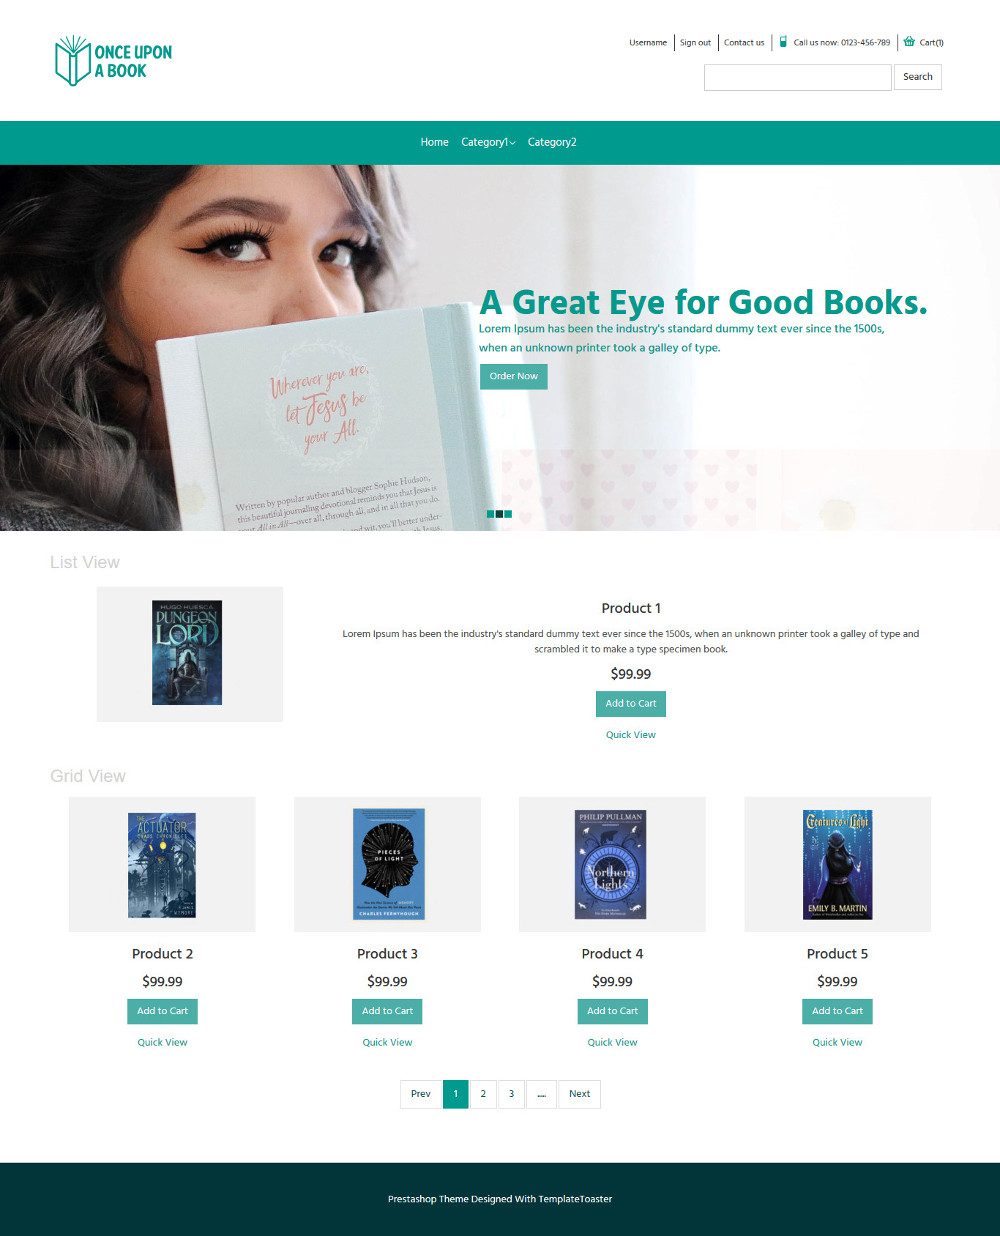 Once Upon a Book Online Book Store Virtuemart Template